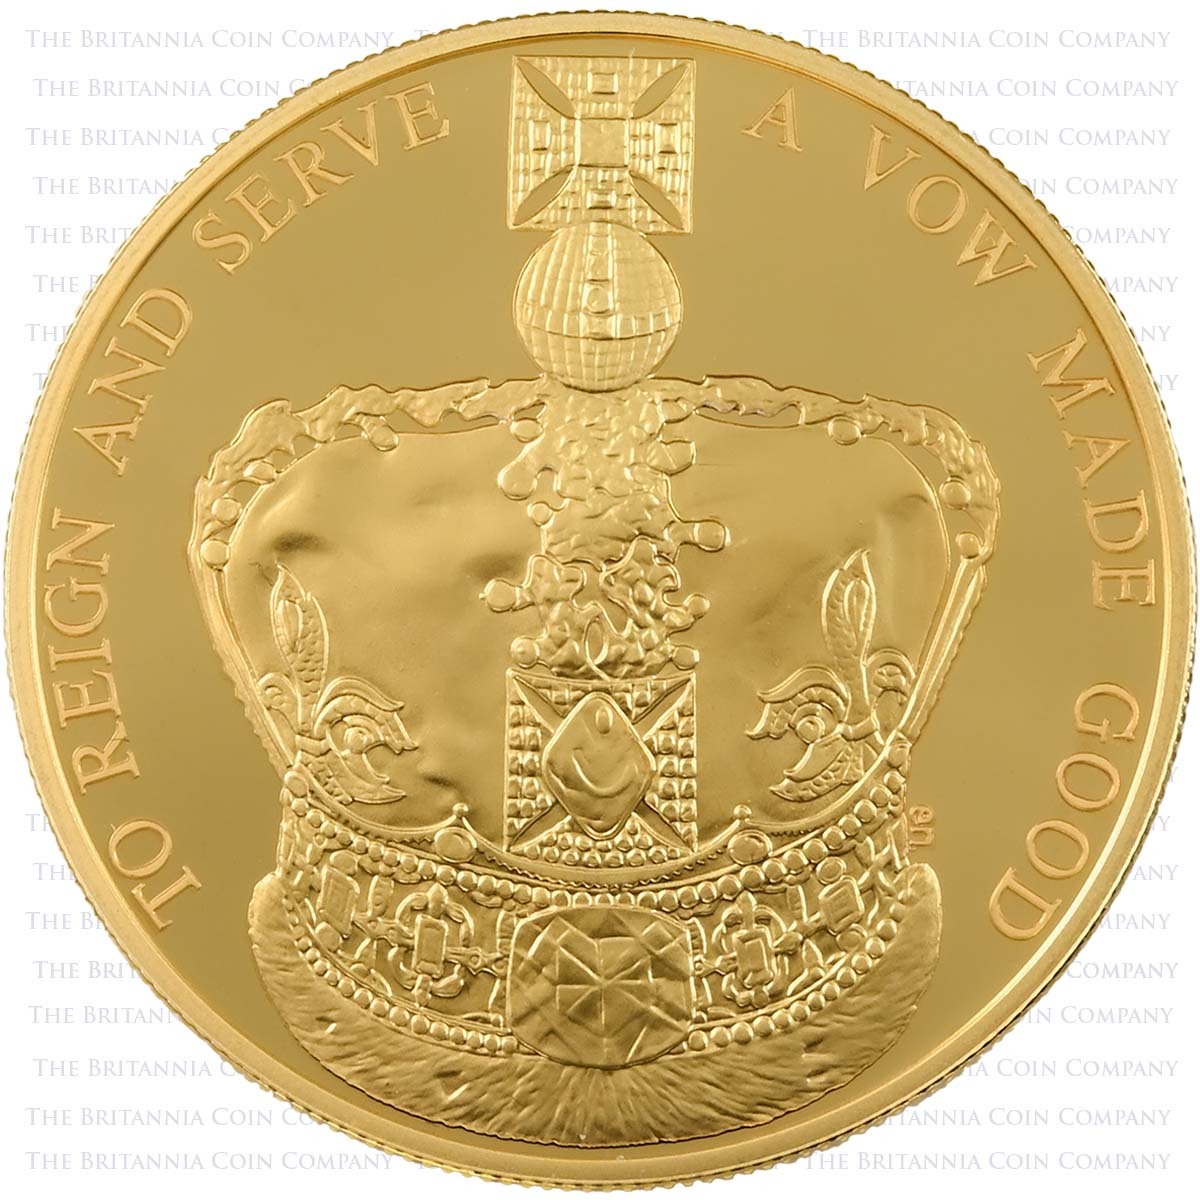 UKCAPG 2013 Queen’s Coronation 60th Anniversary £5 Crown Gold Plated Silver Proof Reverse